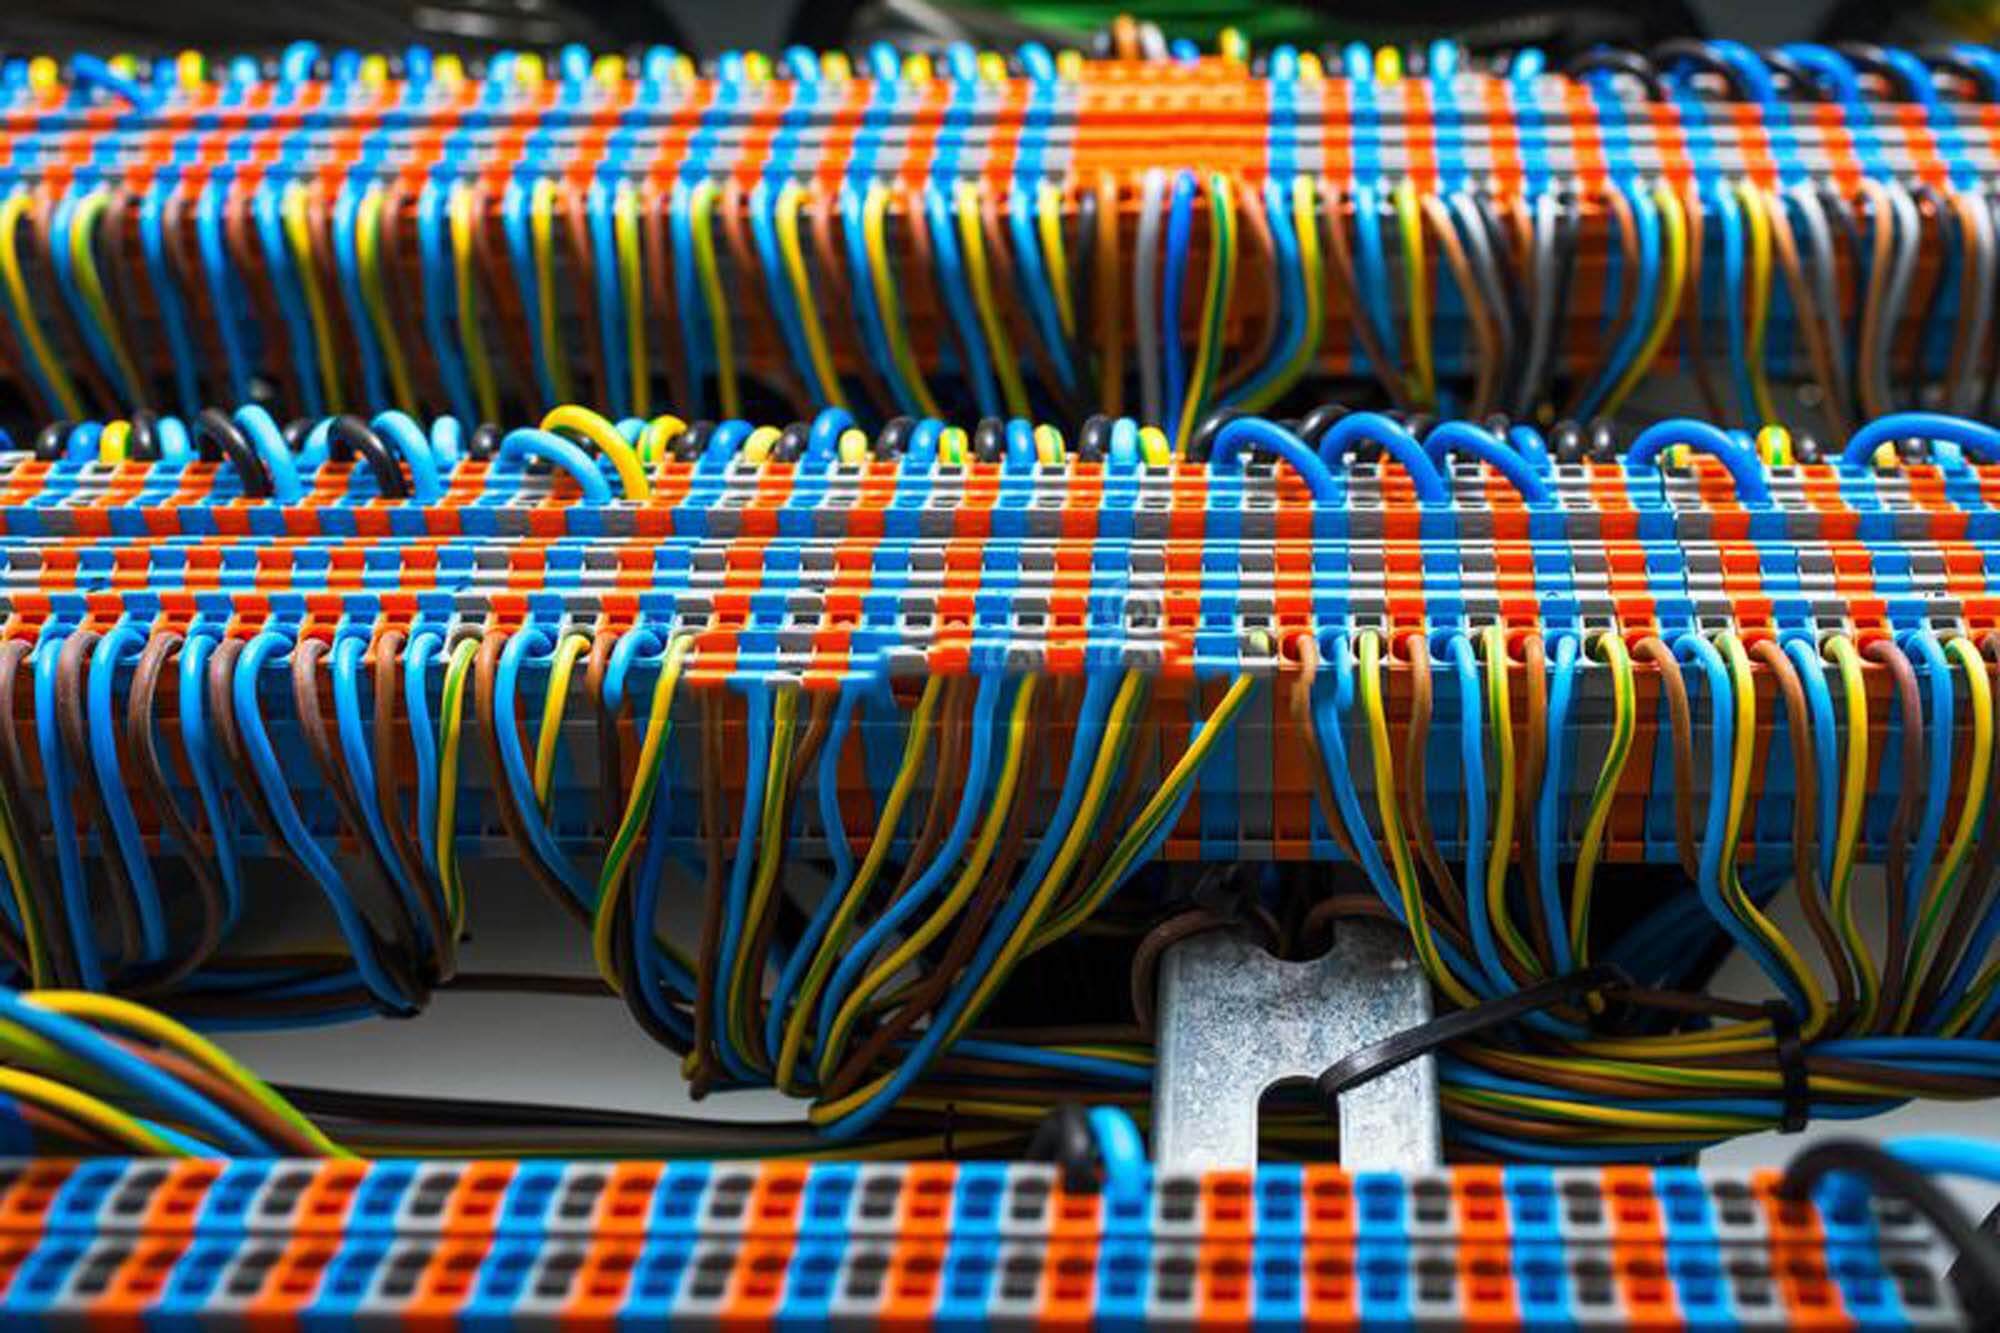 Control Panel Wires in India